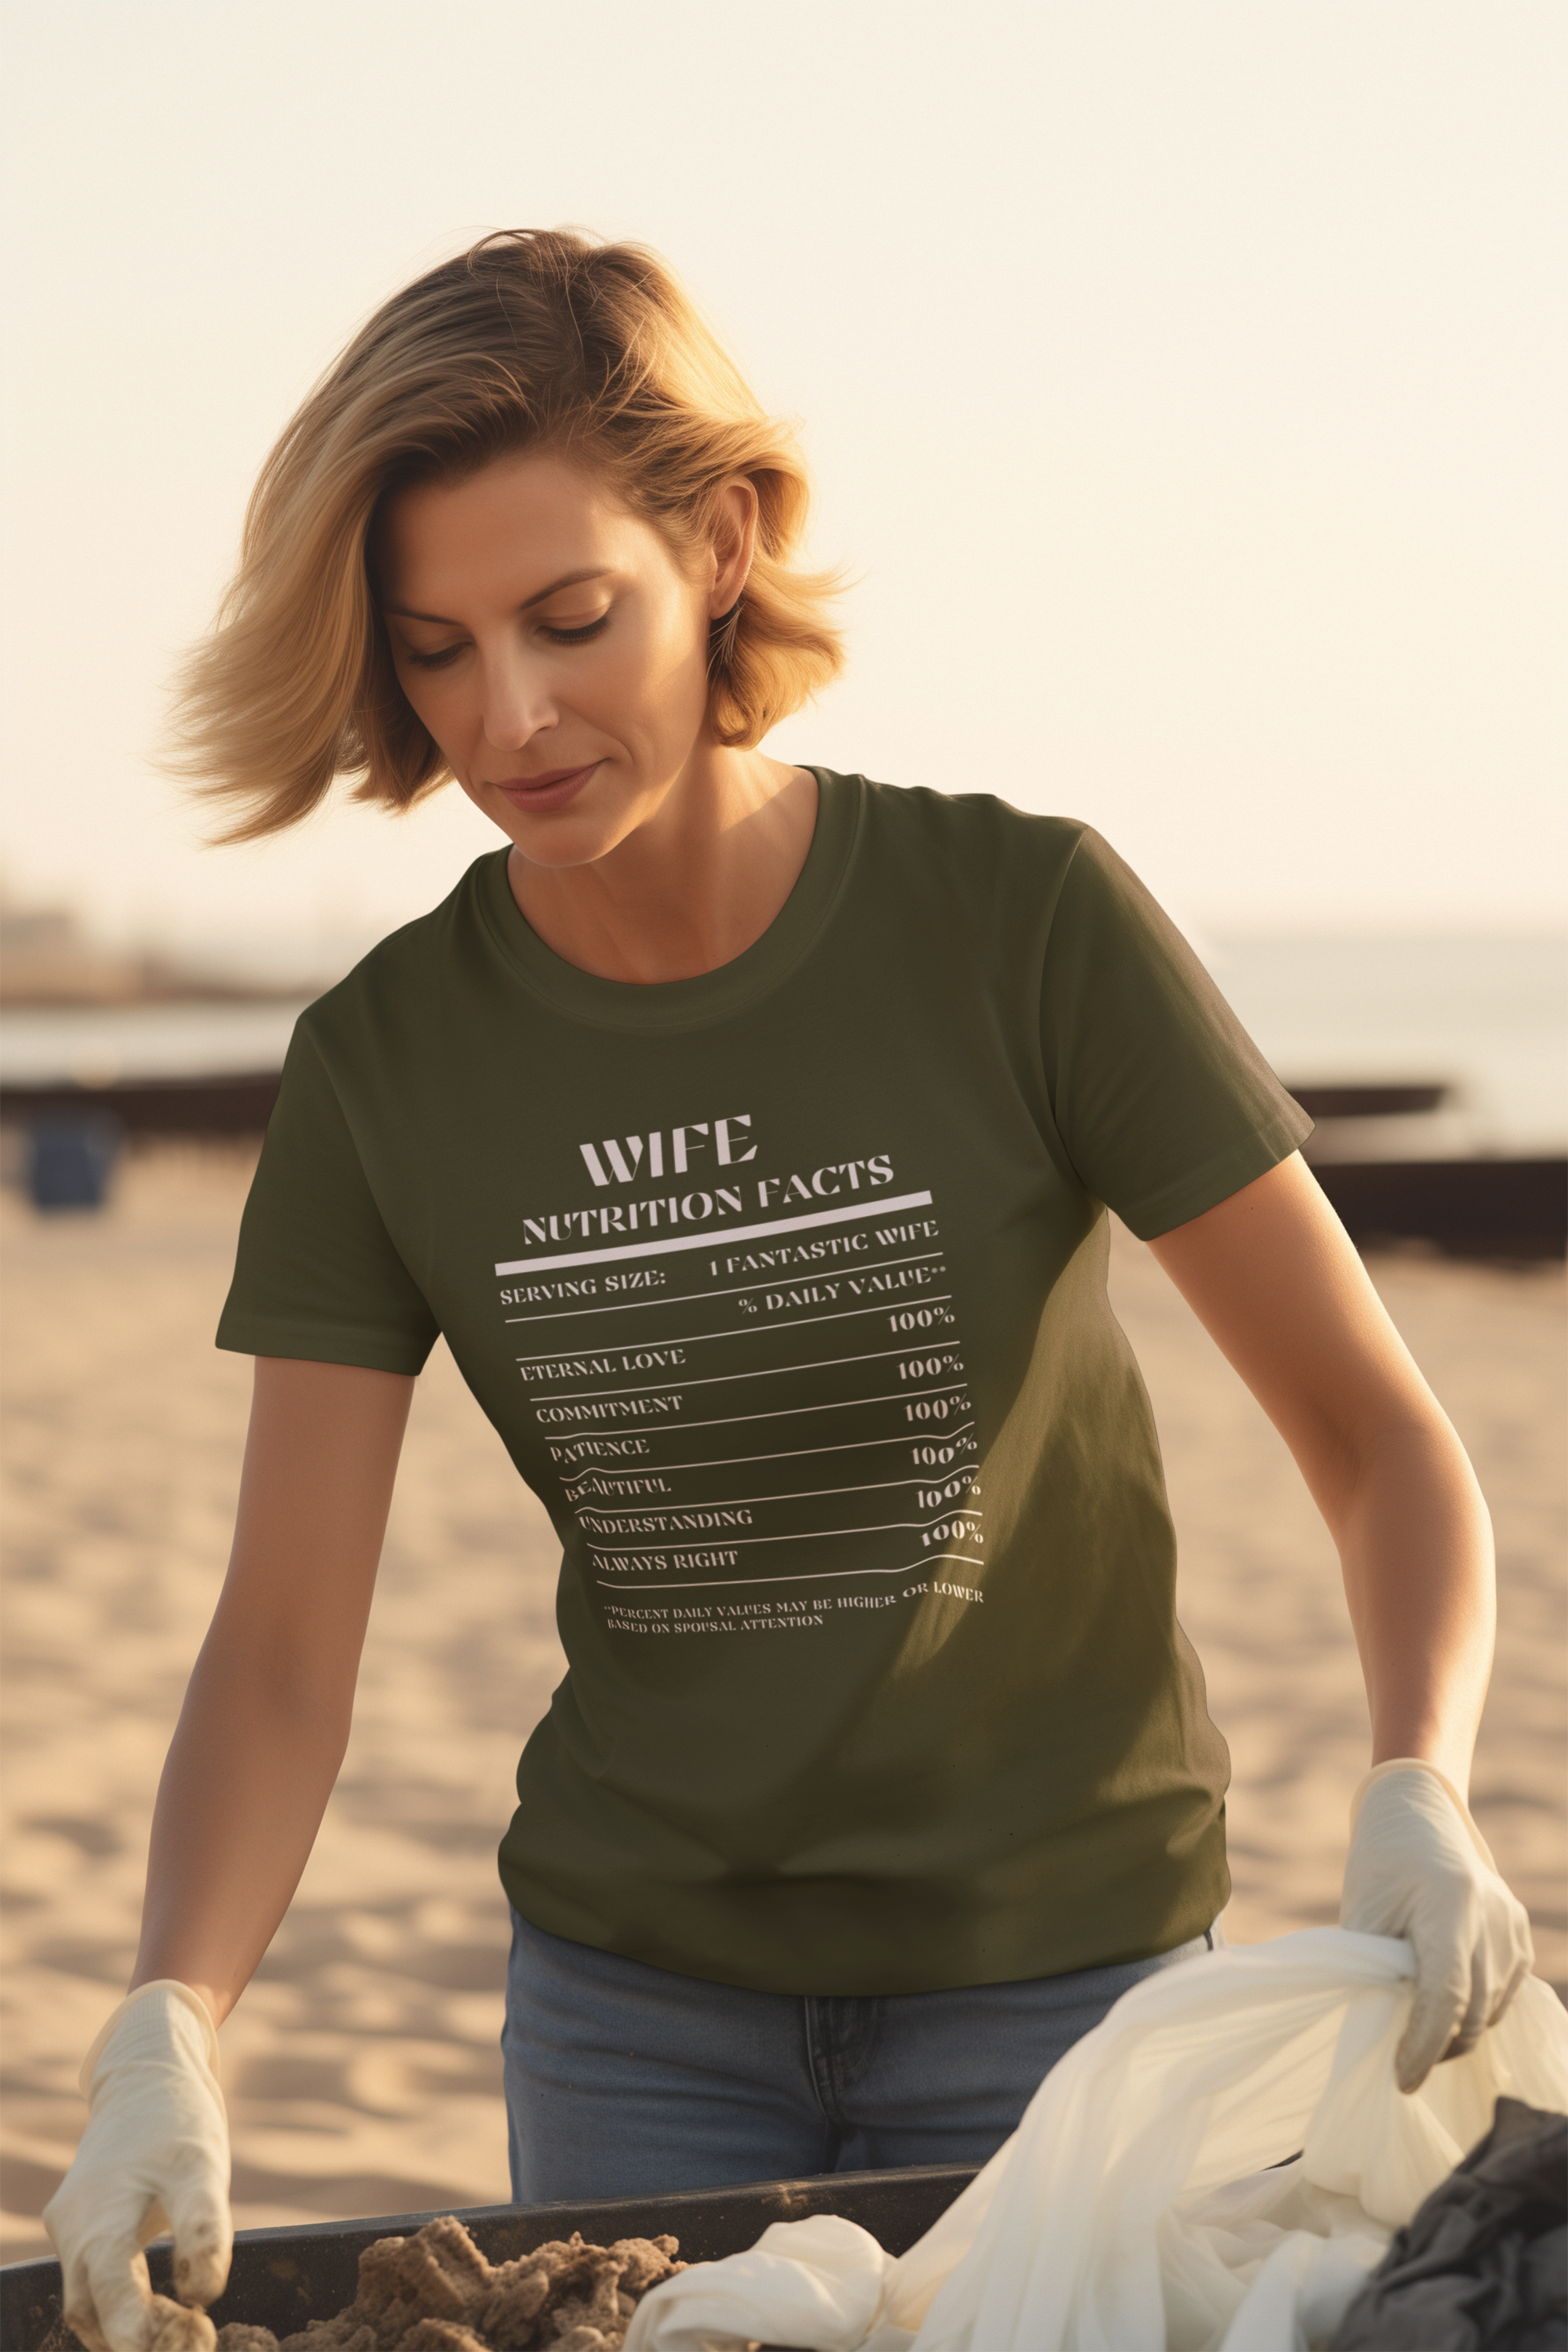 Nutrition Facts T-Shirt SS - Wife - White